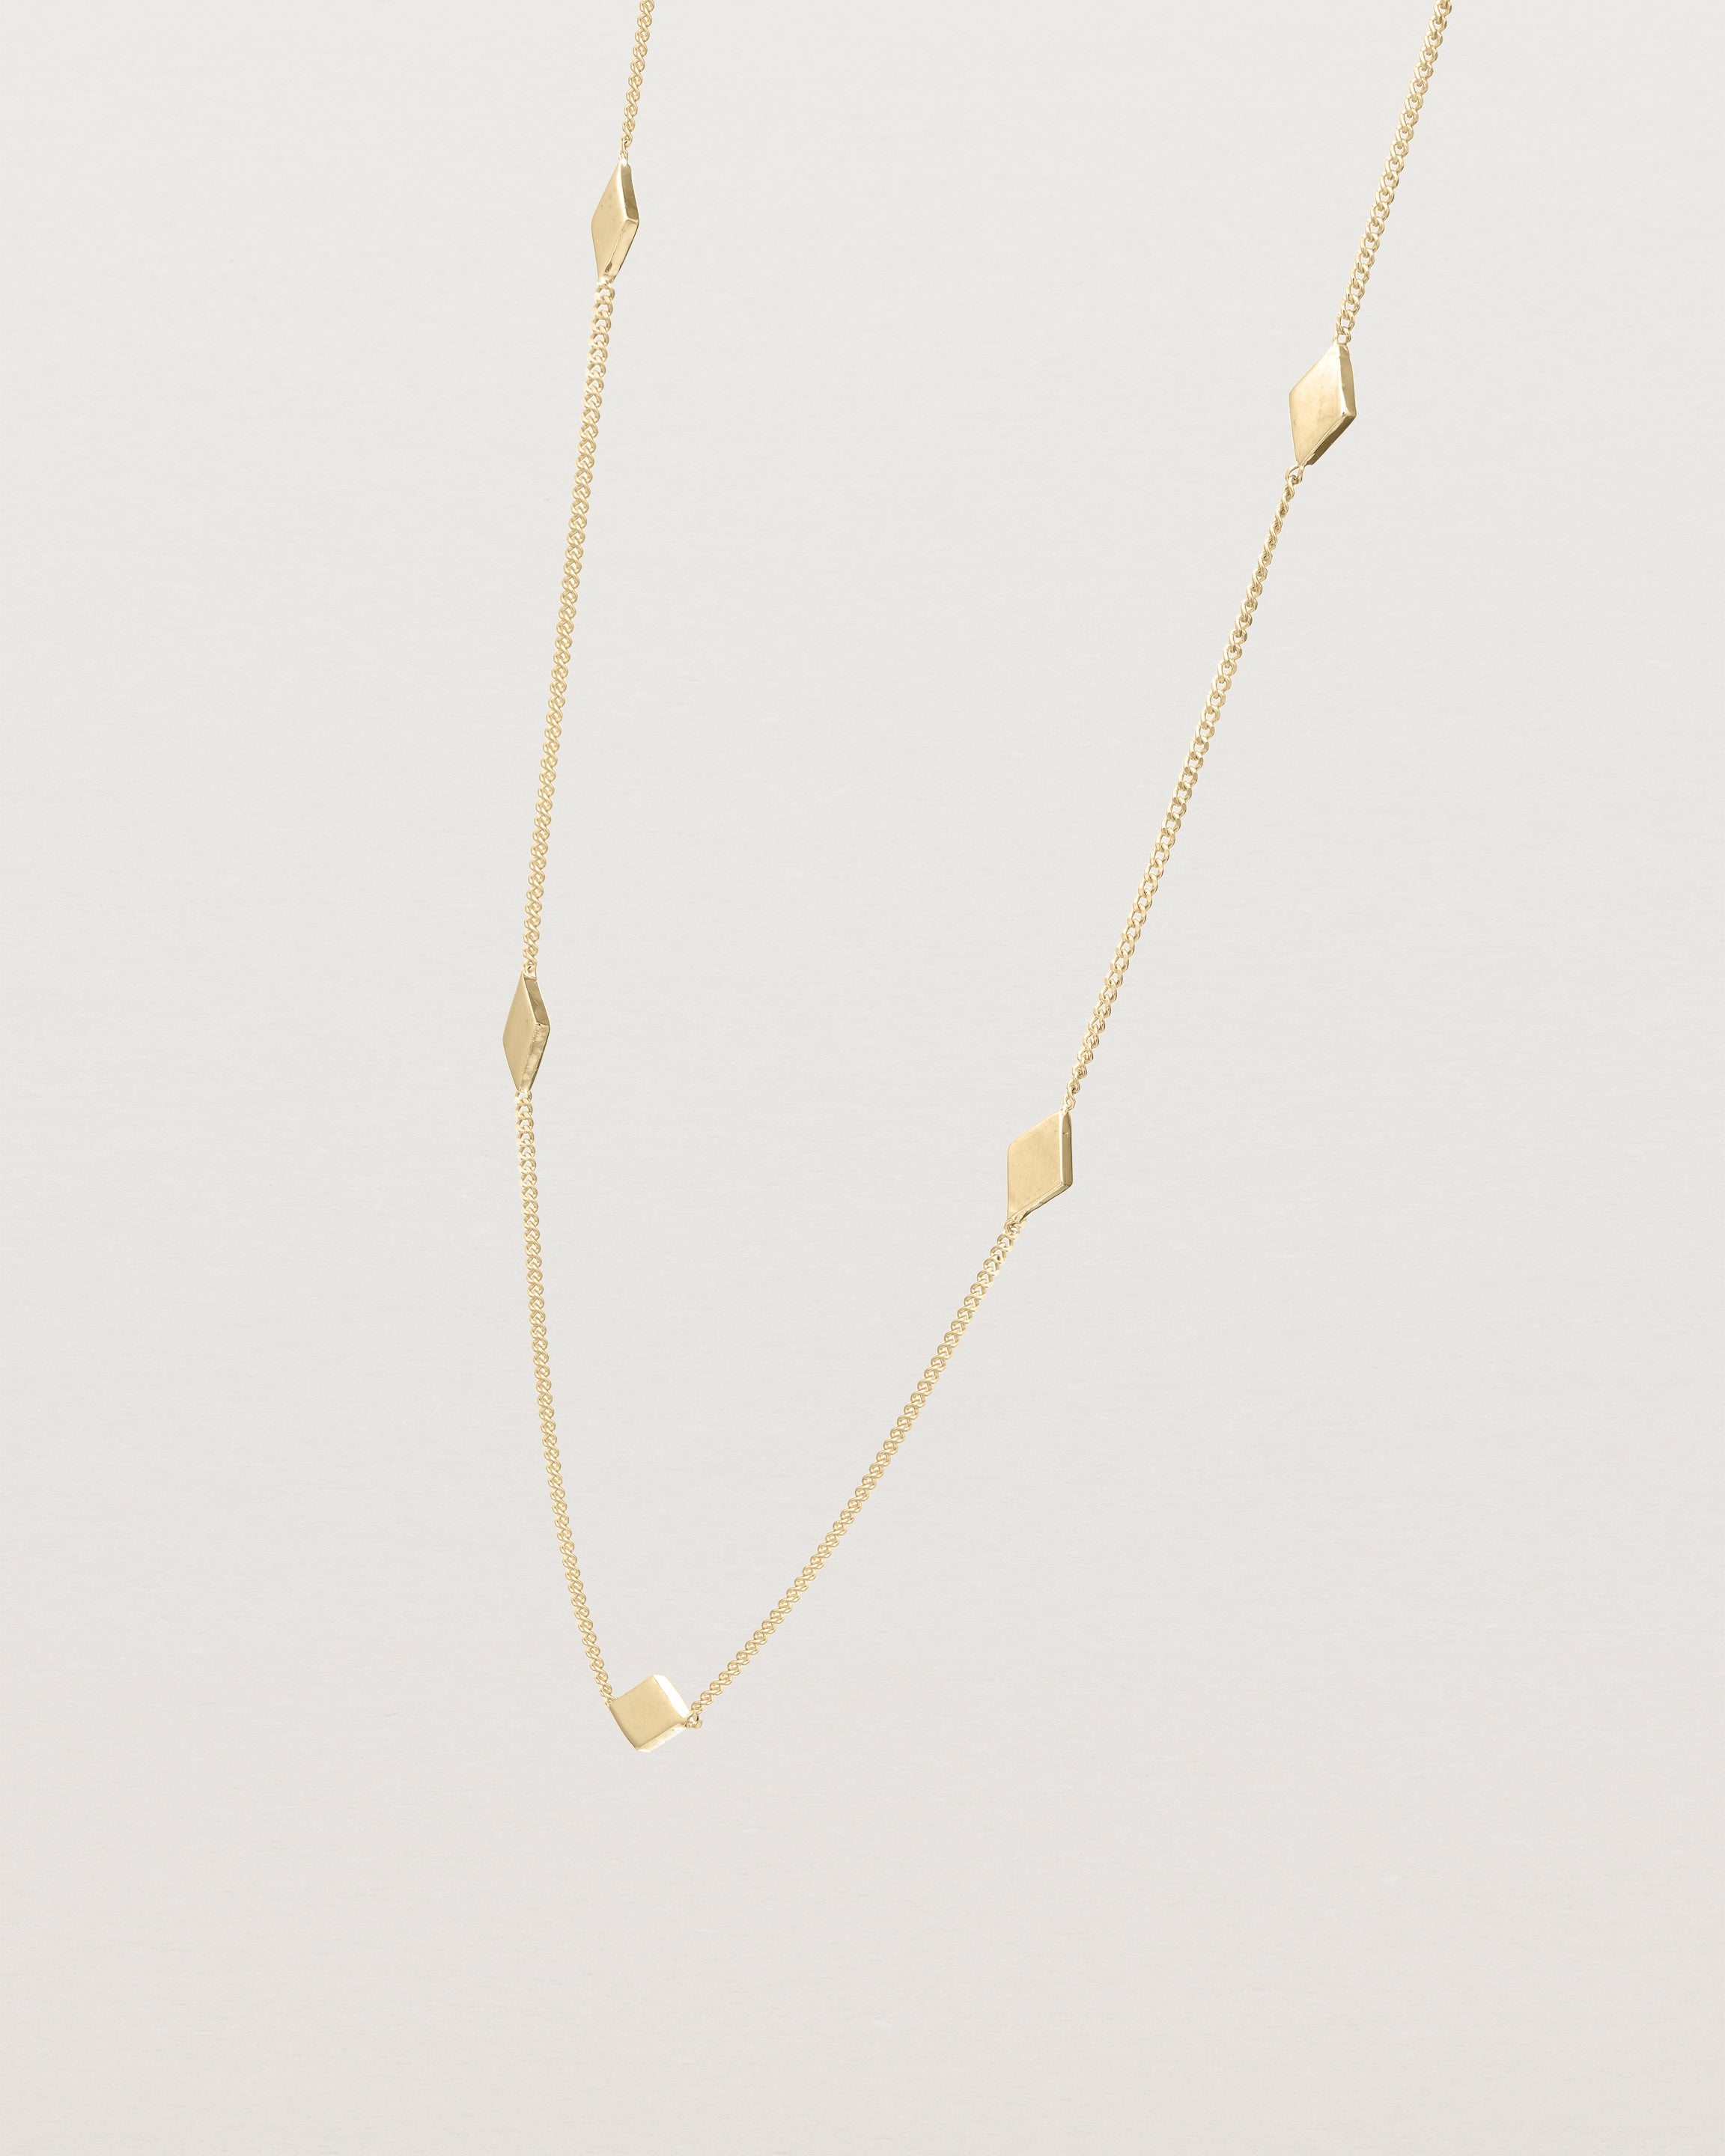 Angled view of the Nuna Charm Necklace in yellow gold.